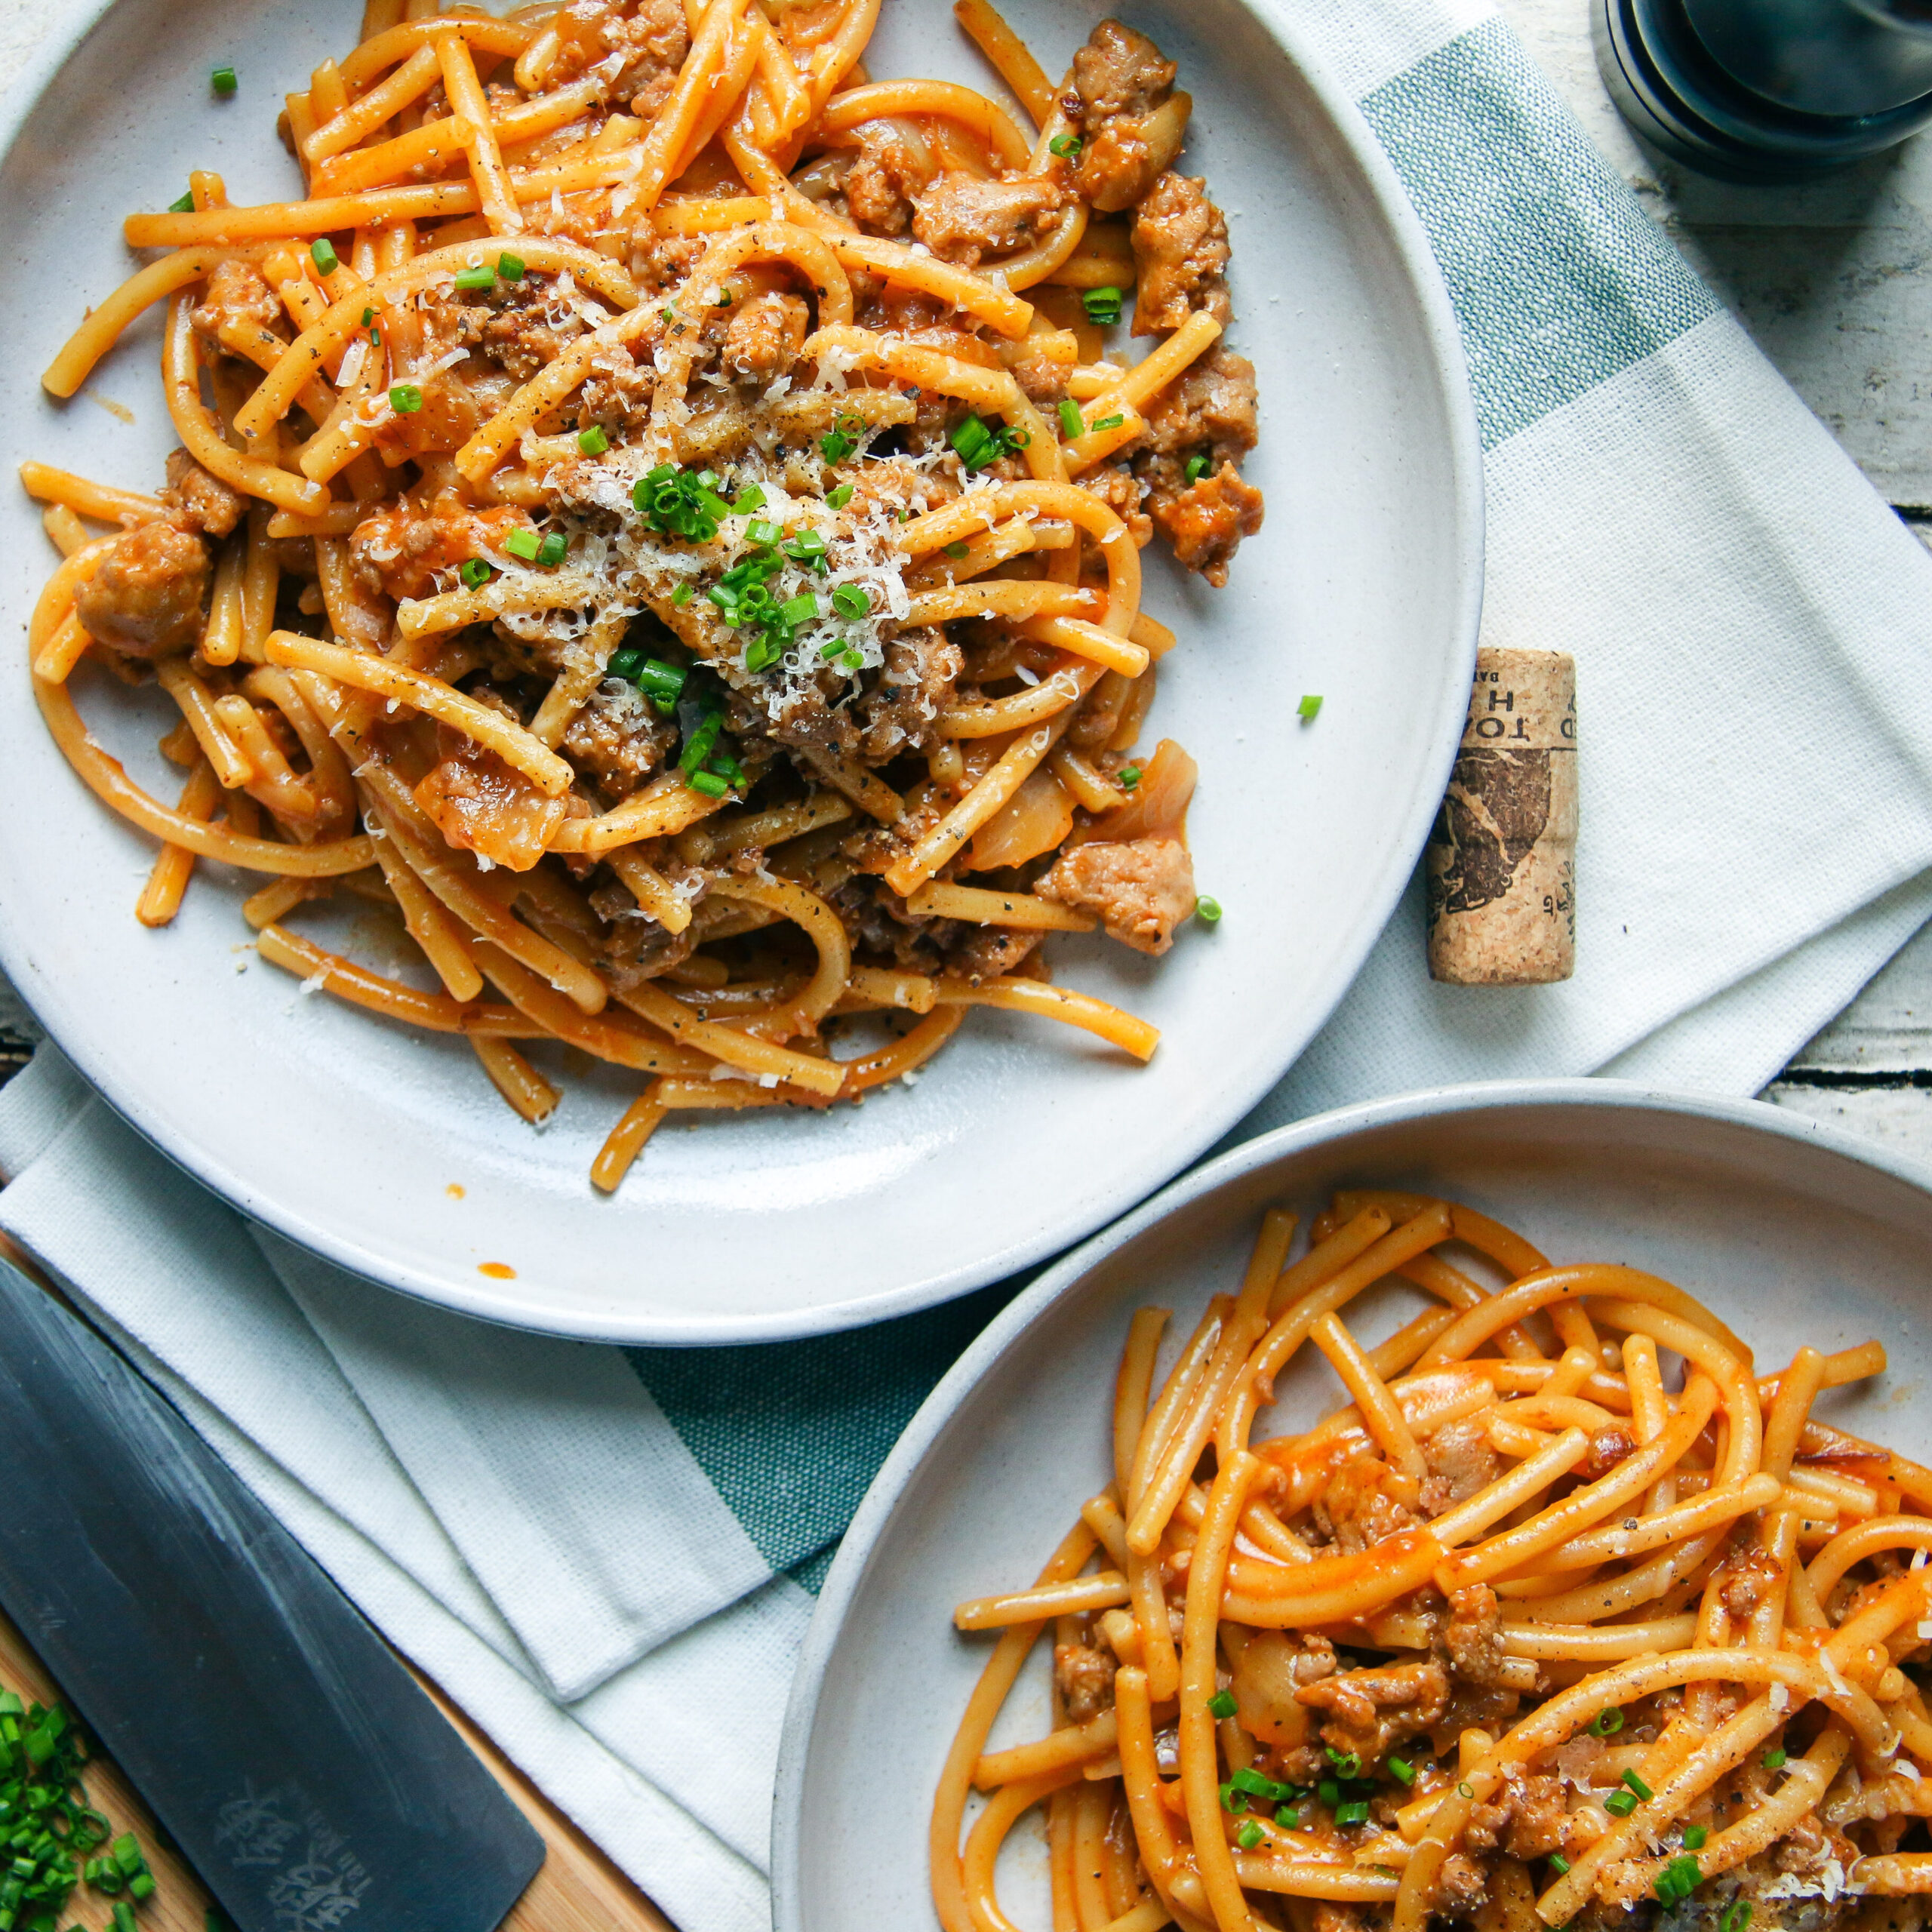 Paprika White Wine Bucatini with Italian Sausage | One Pot Pasta | I Will Not Eat Oysters